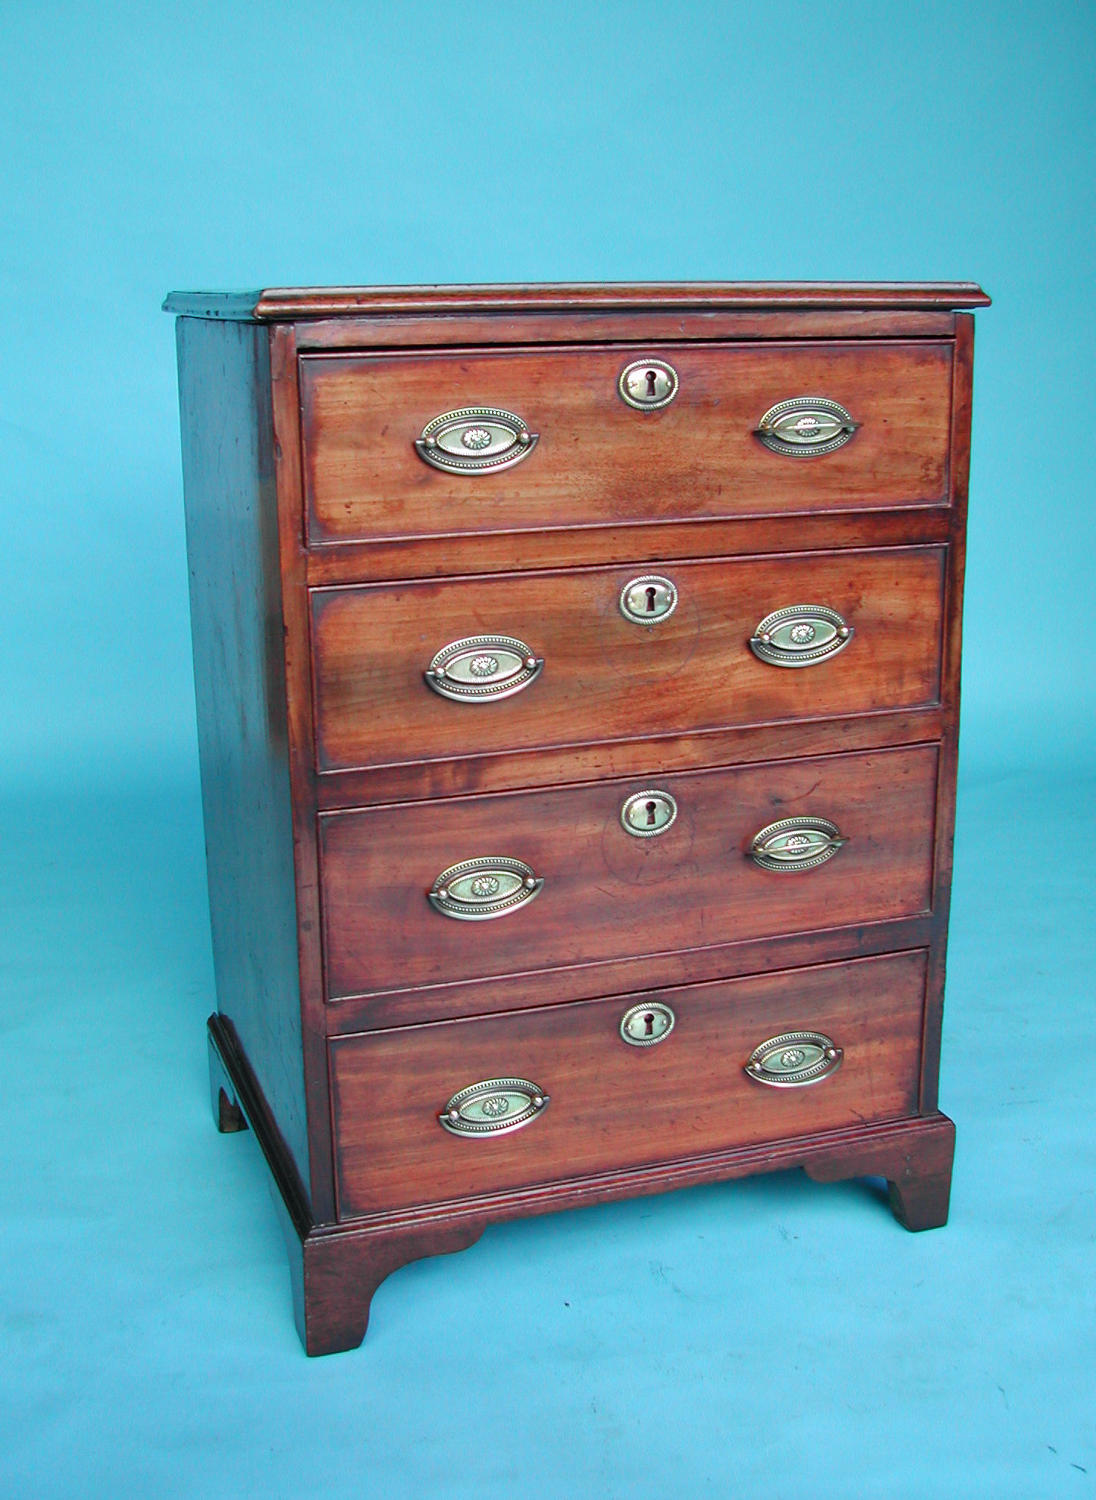 Antique Early 19thc small Mahogany Chest of Drawers. English. C1800-20